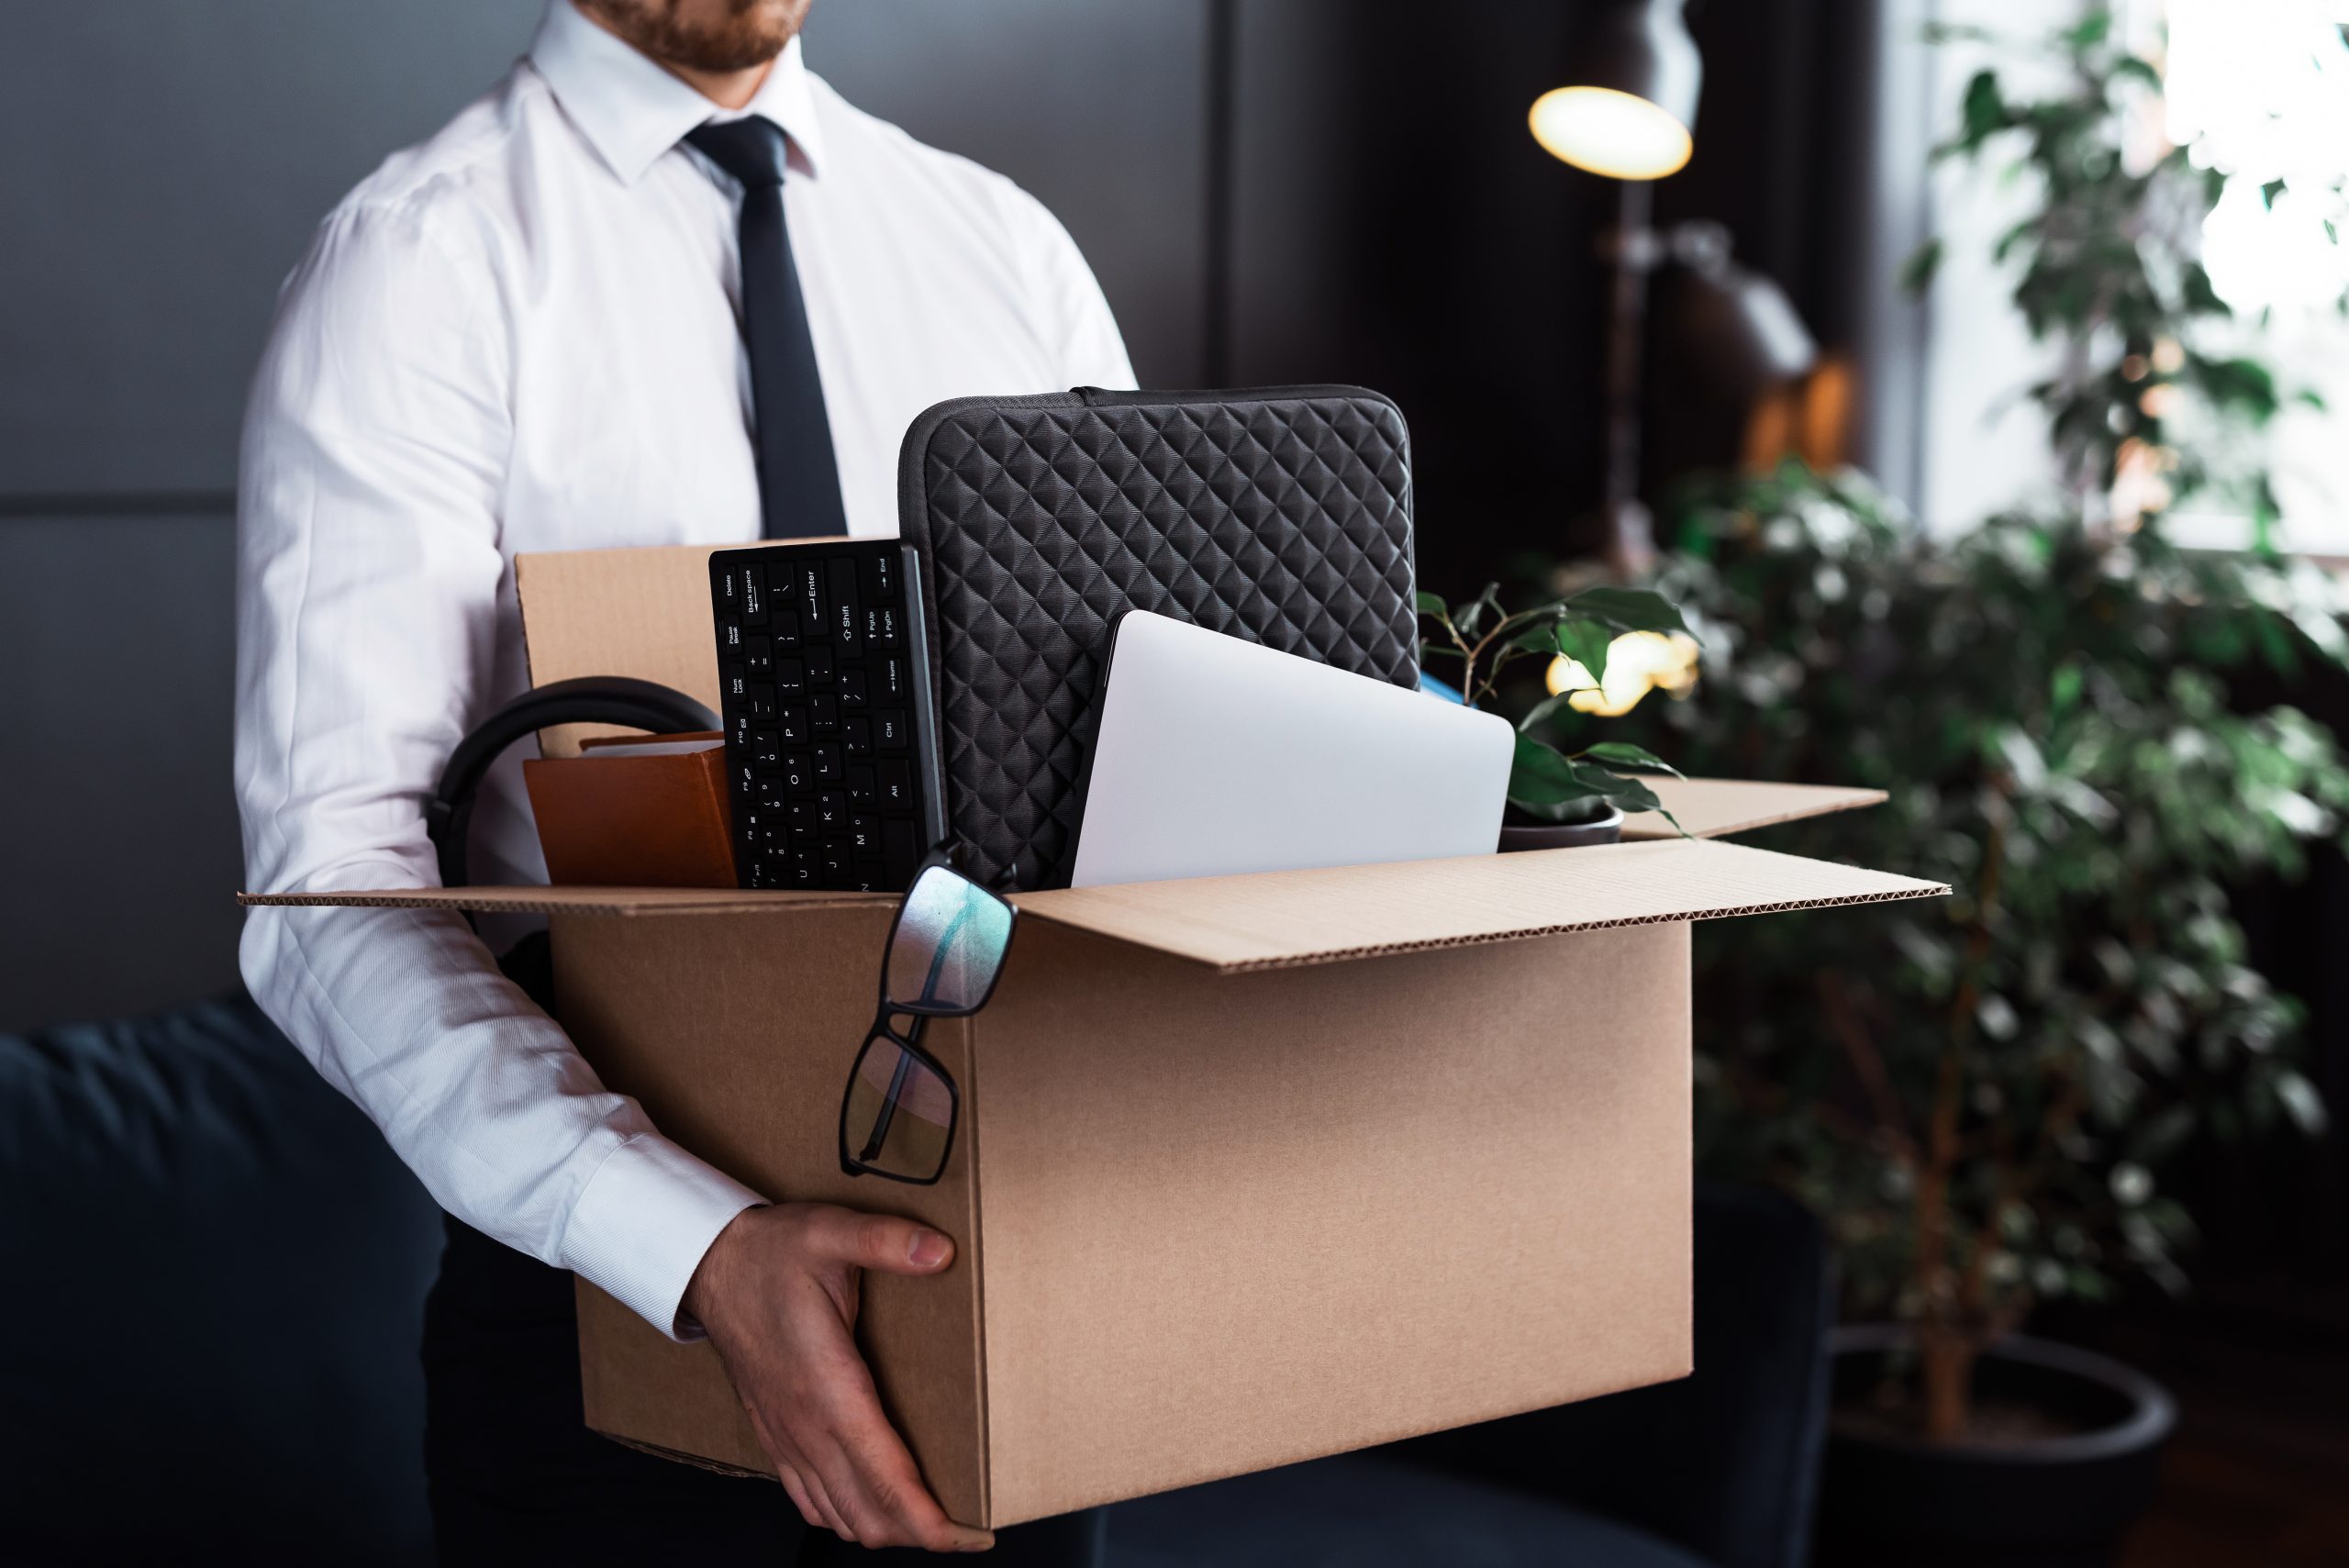 Young man getting fired from his job. Businessman and cardboard box with his personal stuff from work.